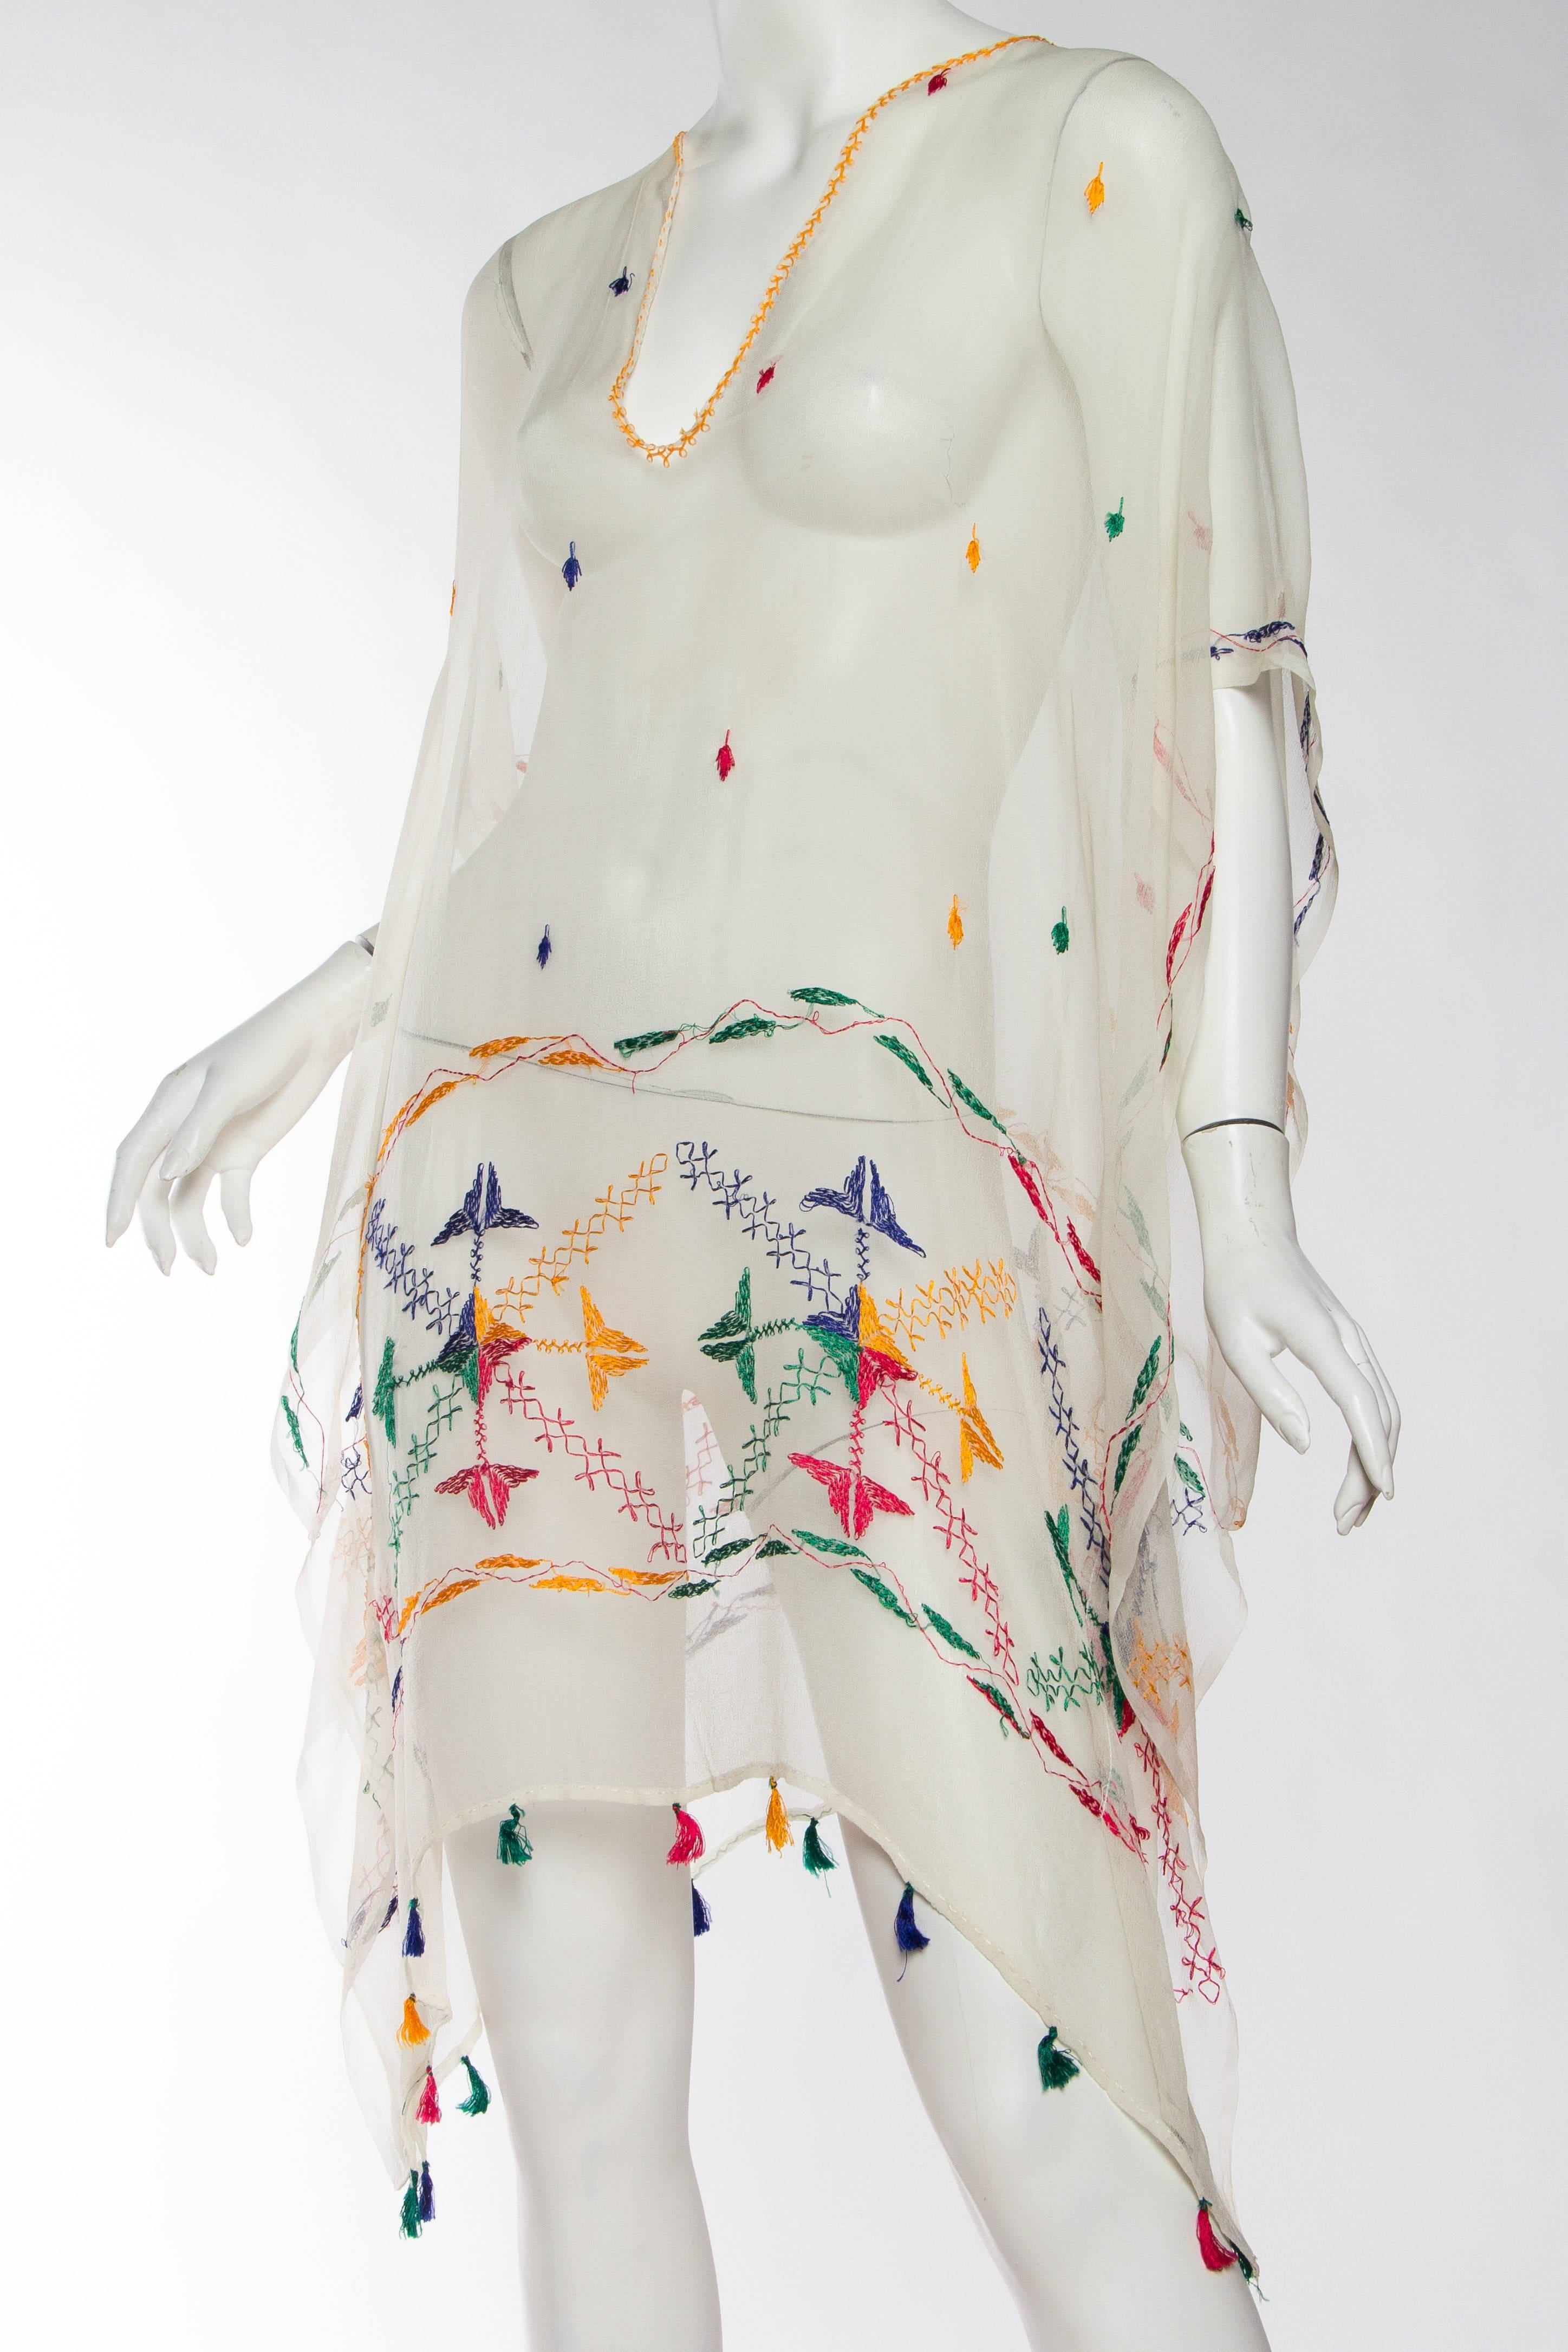 Vintage Silk Chiffon Tunic with Hand Embroidery 1